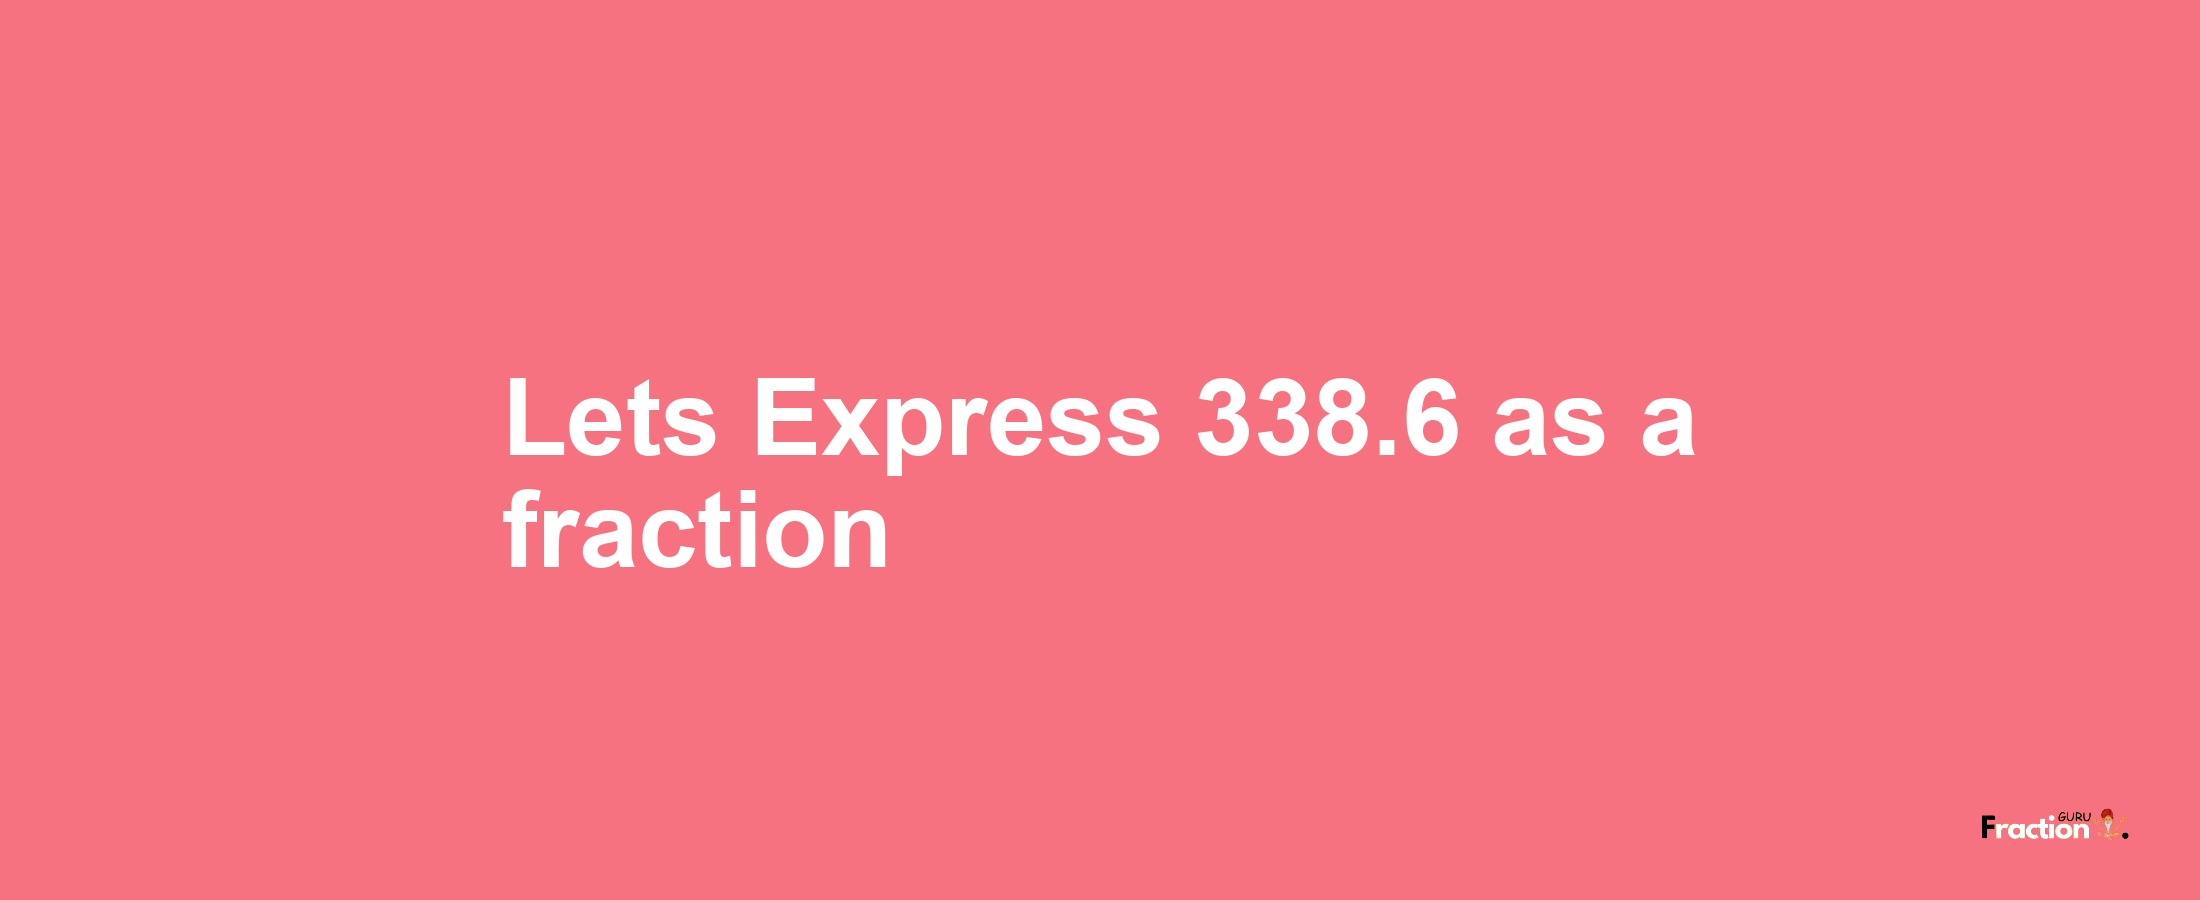 Lets Express 338.6 as afraction